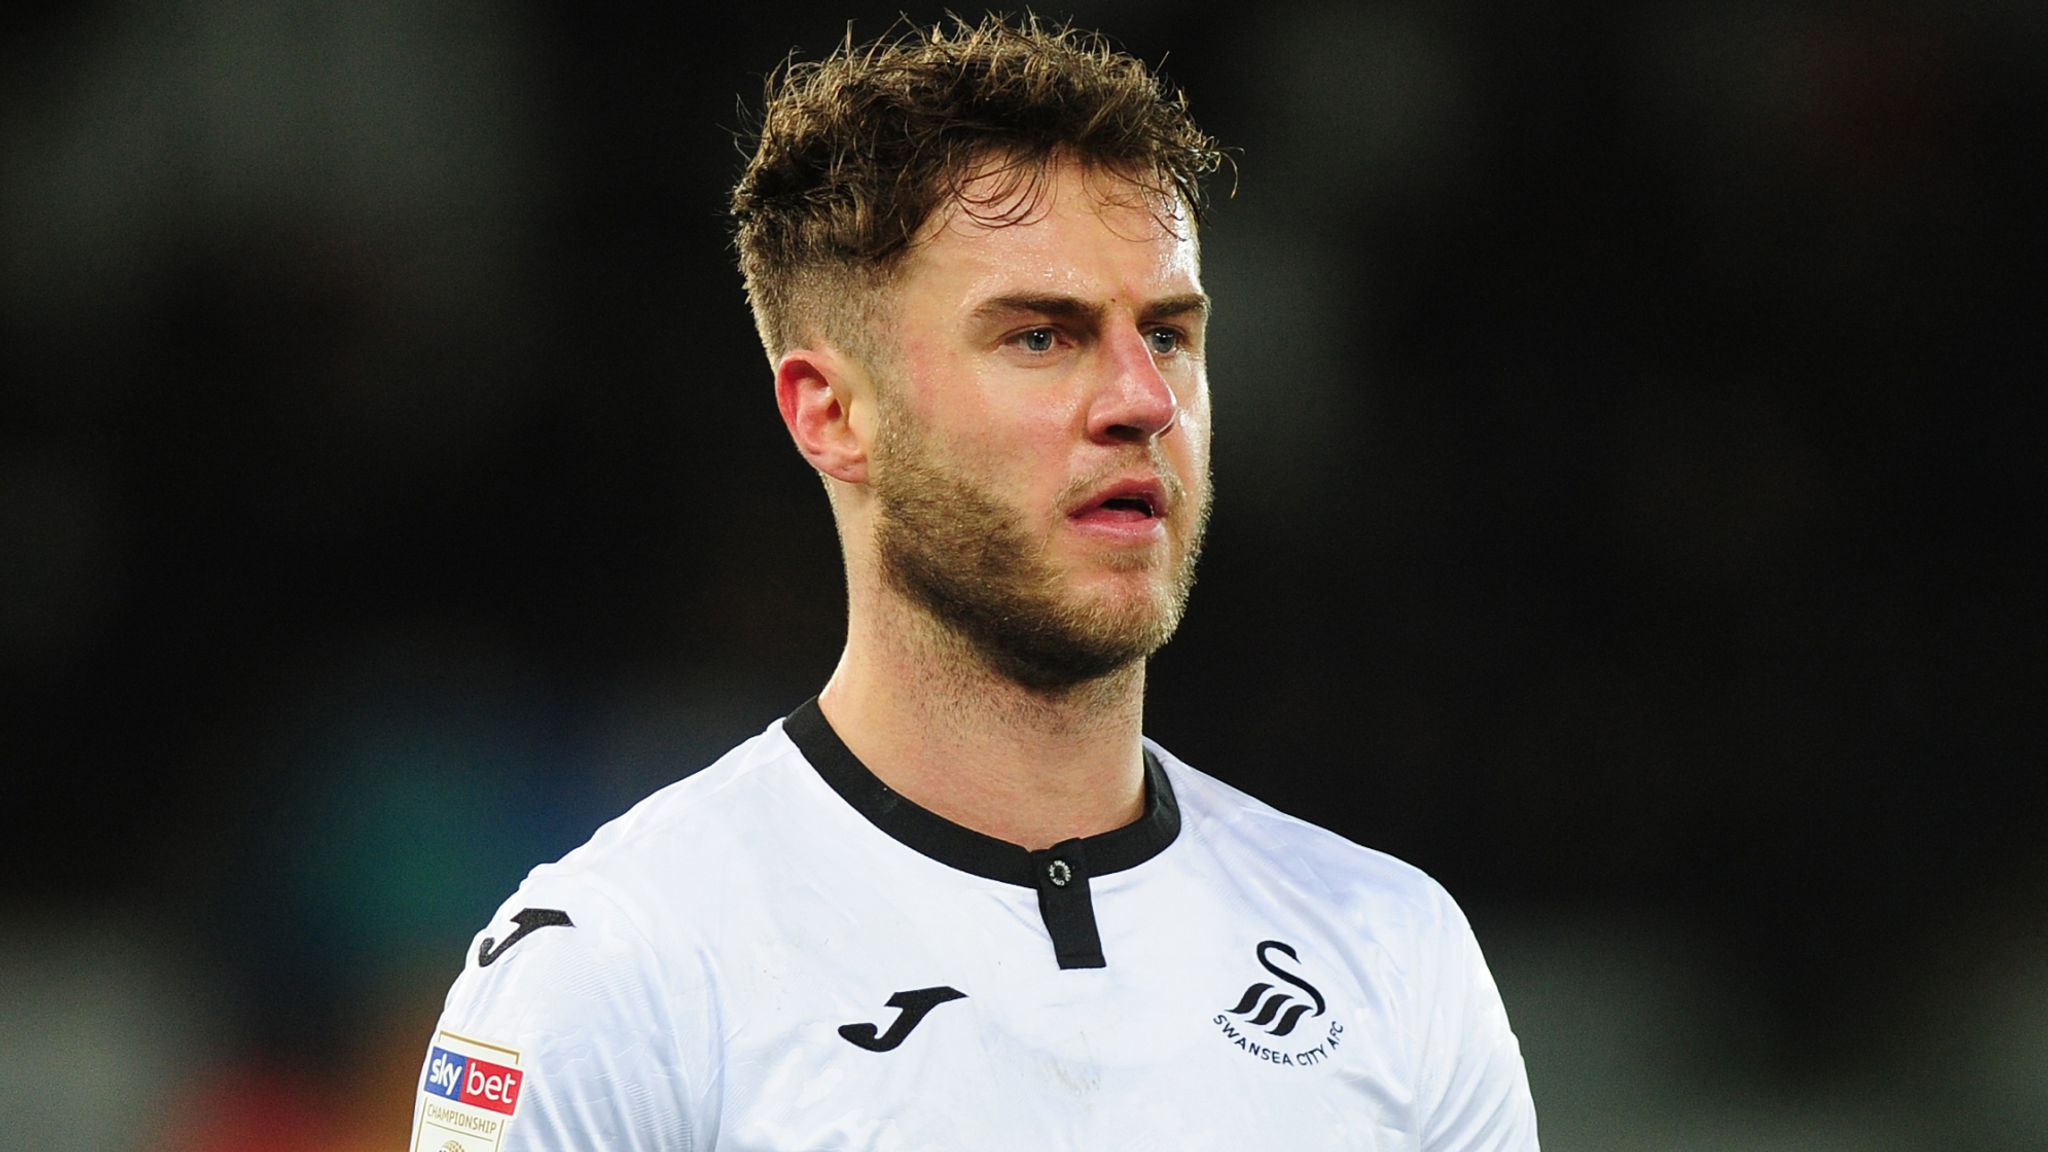 Joe Rodon: Why are Manchester United linked with Swansea defender? | Football News | Sky Sports